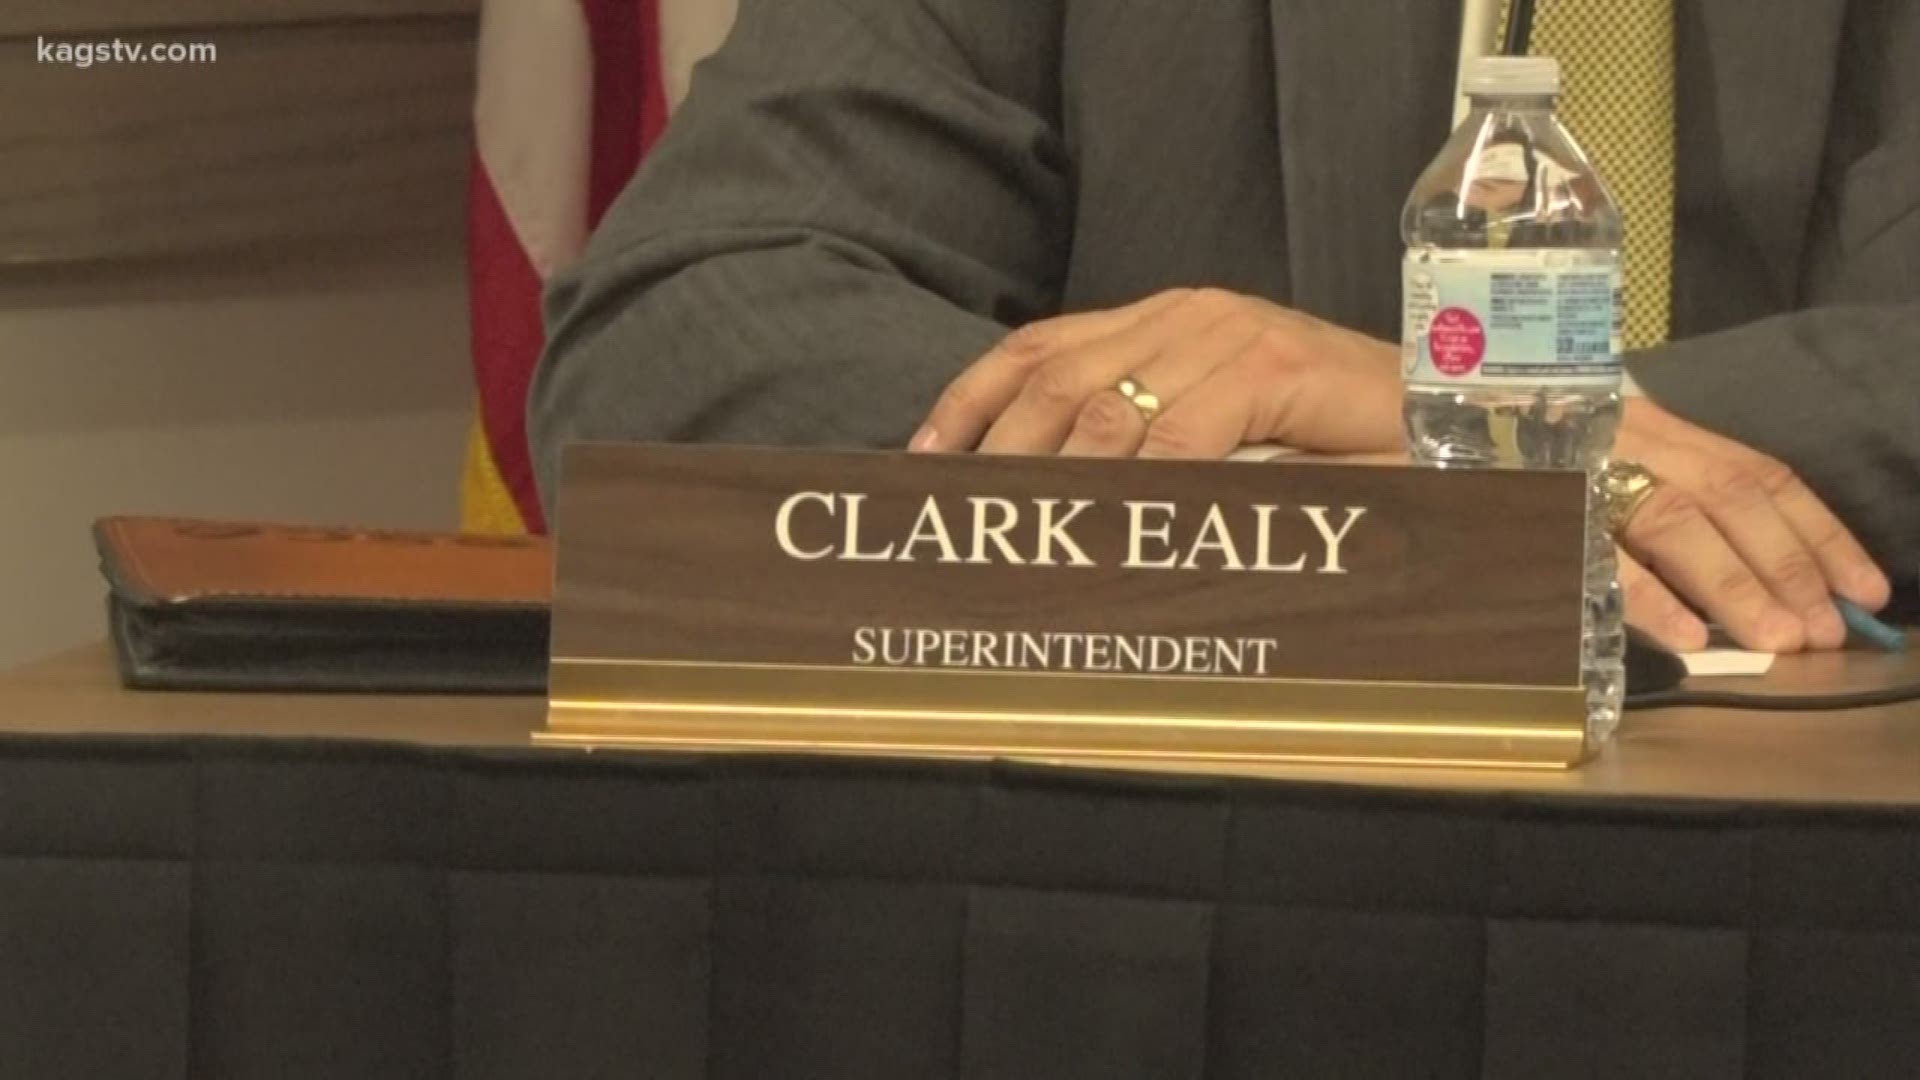 Dr. Clark Ealy resigned from his superintendent position, while the board named a interim superintendent at a special meeting Wednesday night